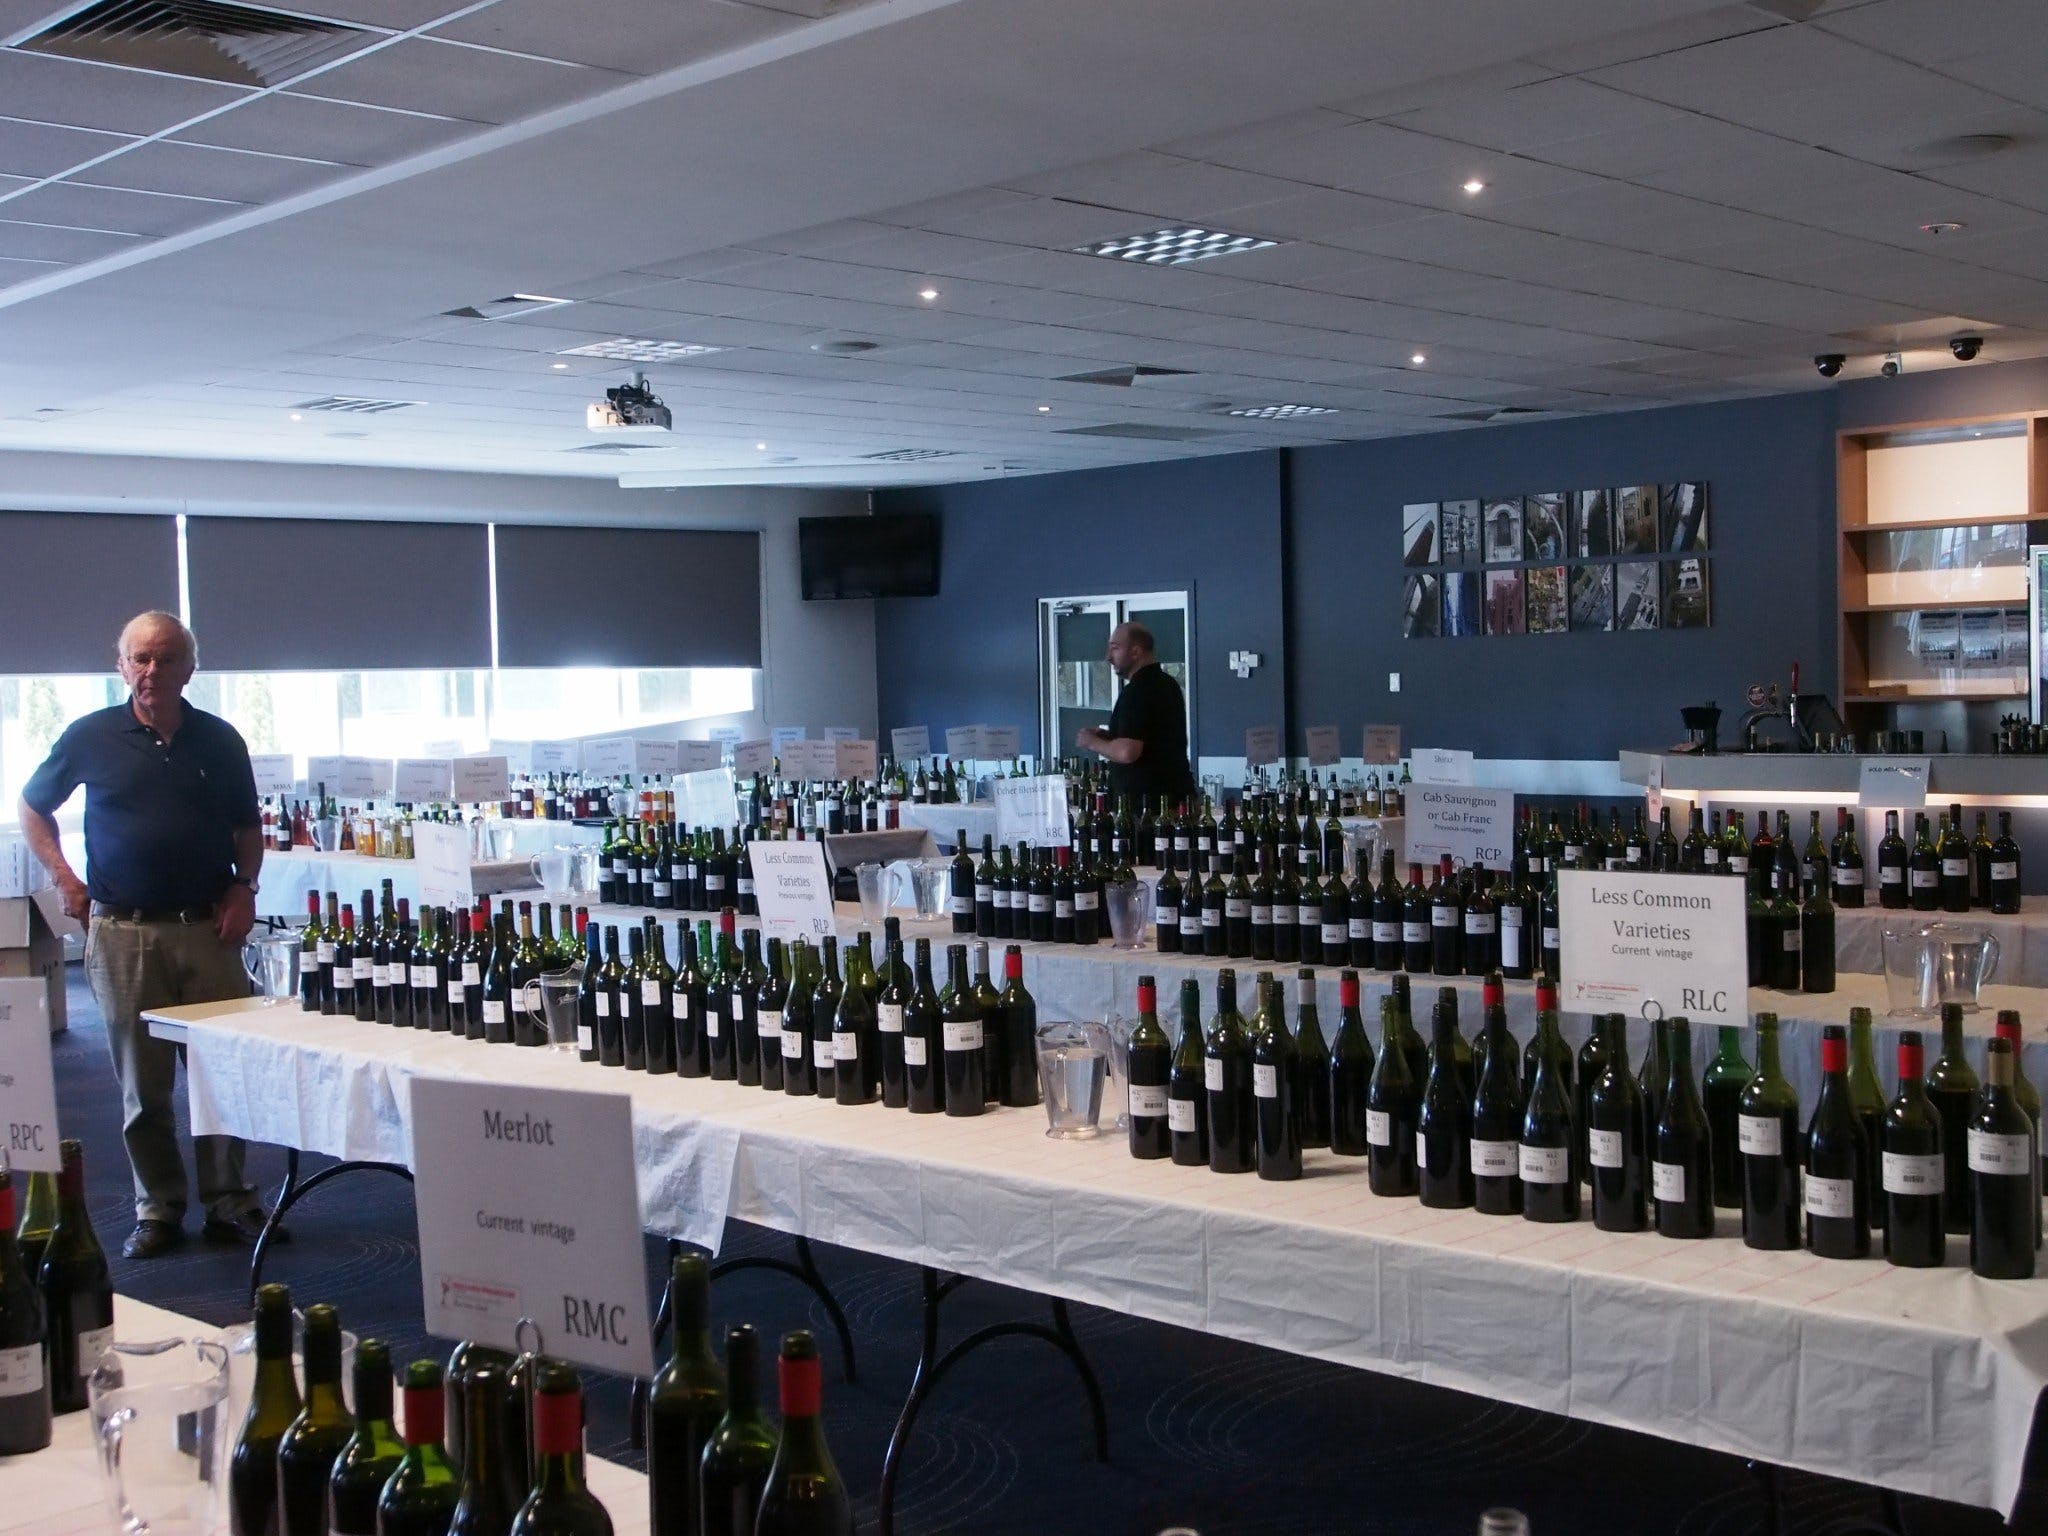 Eltham and District Wine Guild Annual Wine Show - 51st Annual Show - WA Accommodation